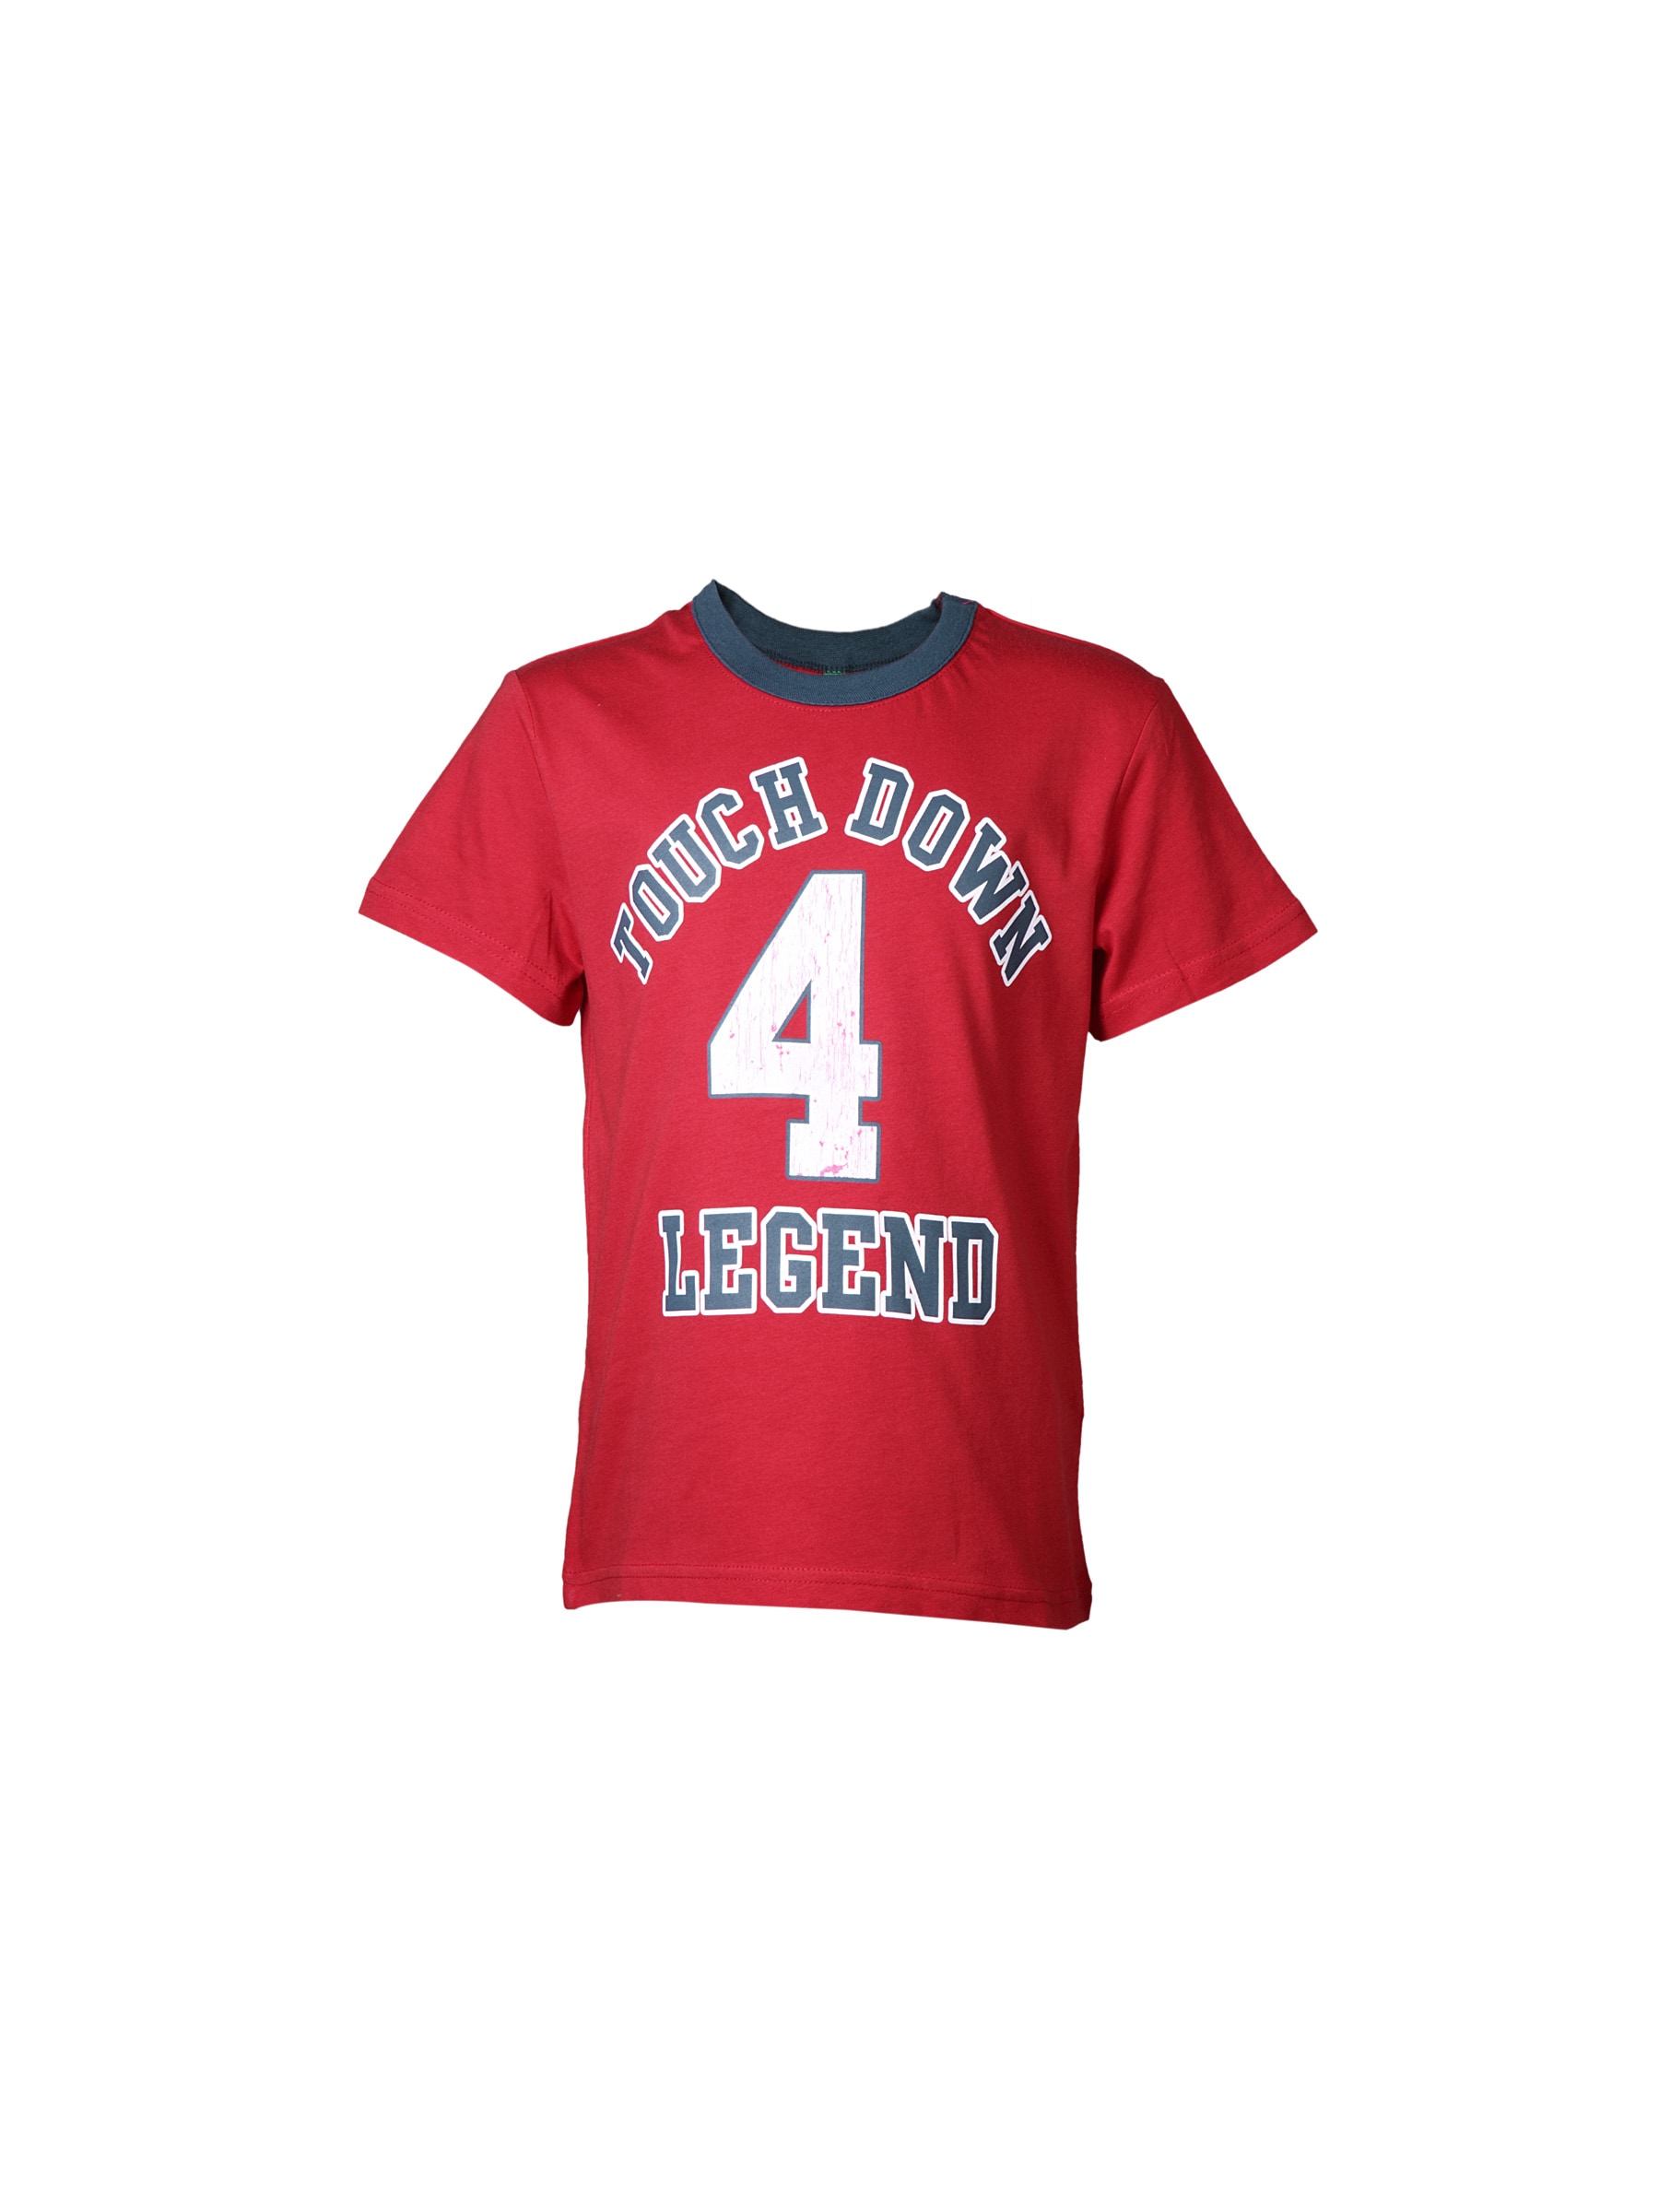 United Colors of Benetton Kids Boys Red Printed T-shirt